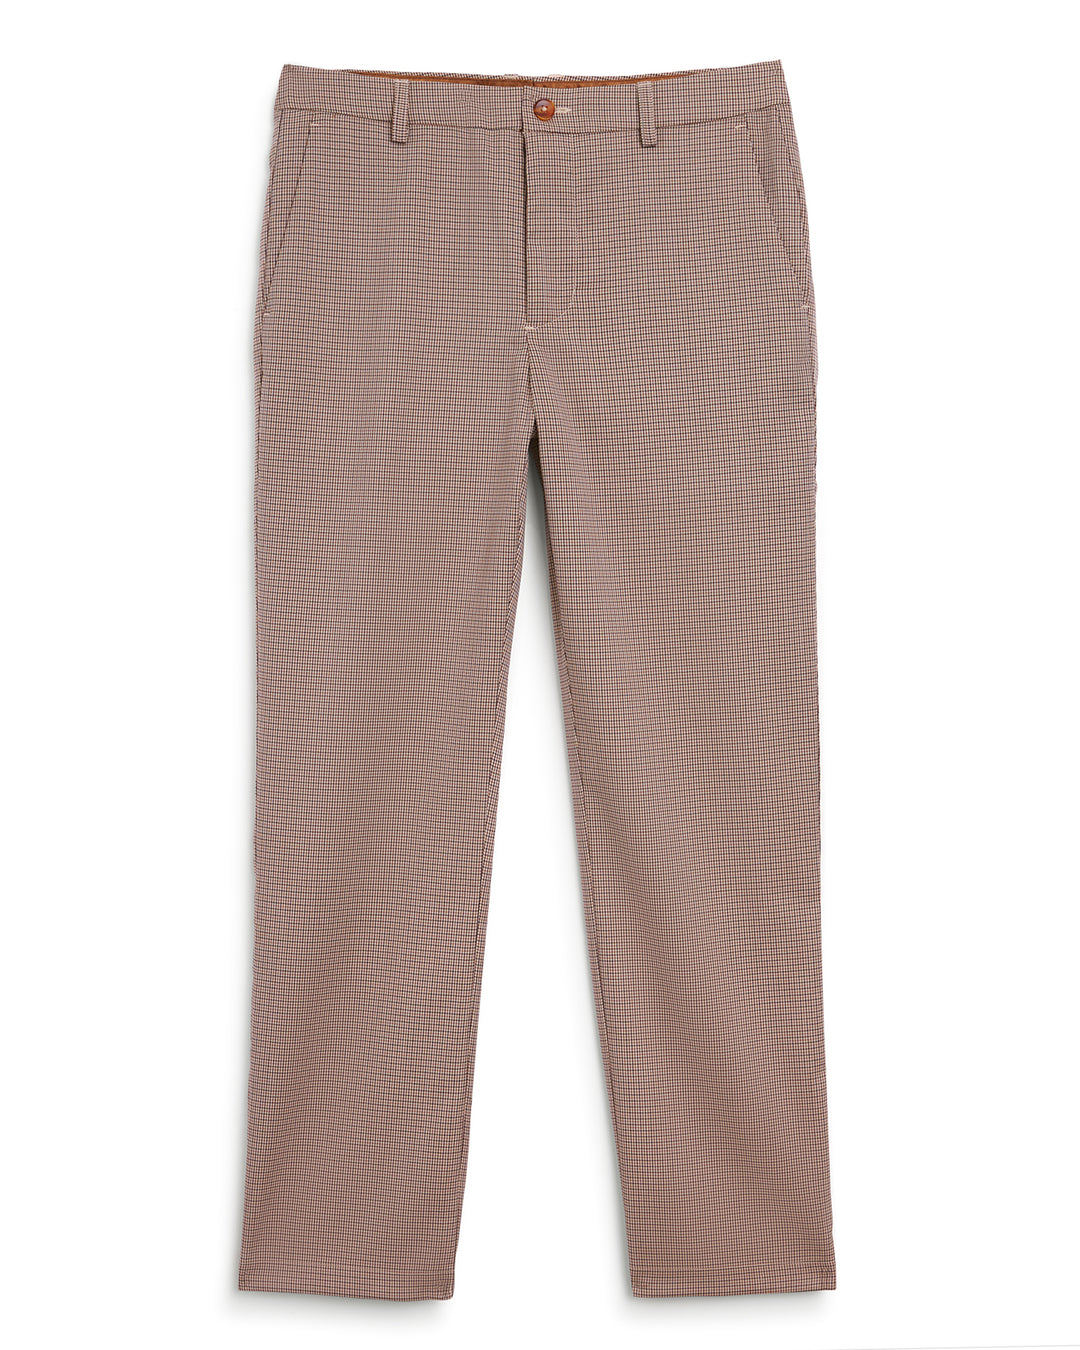 The Tresco Trouser - Carajillo by Dandy Del Mar in beige with a relaxed fit.